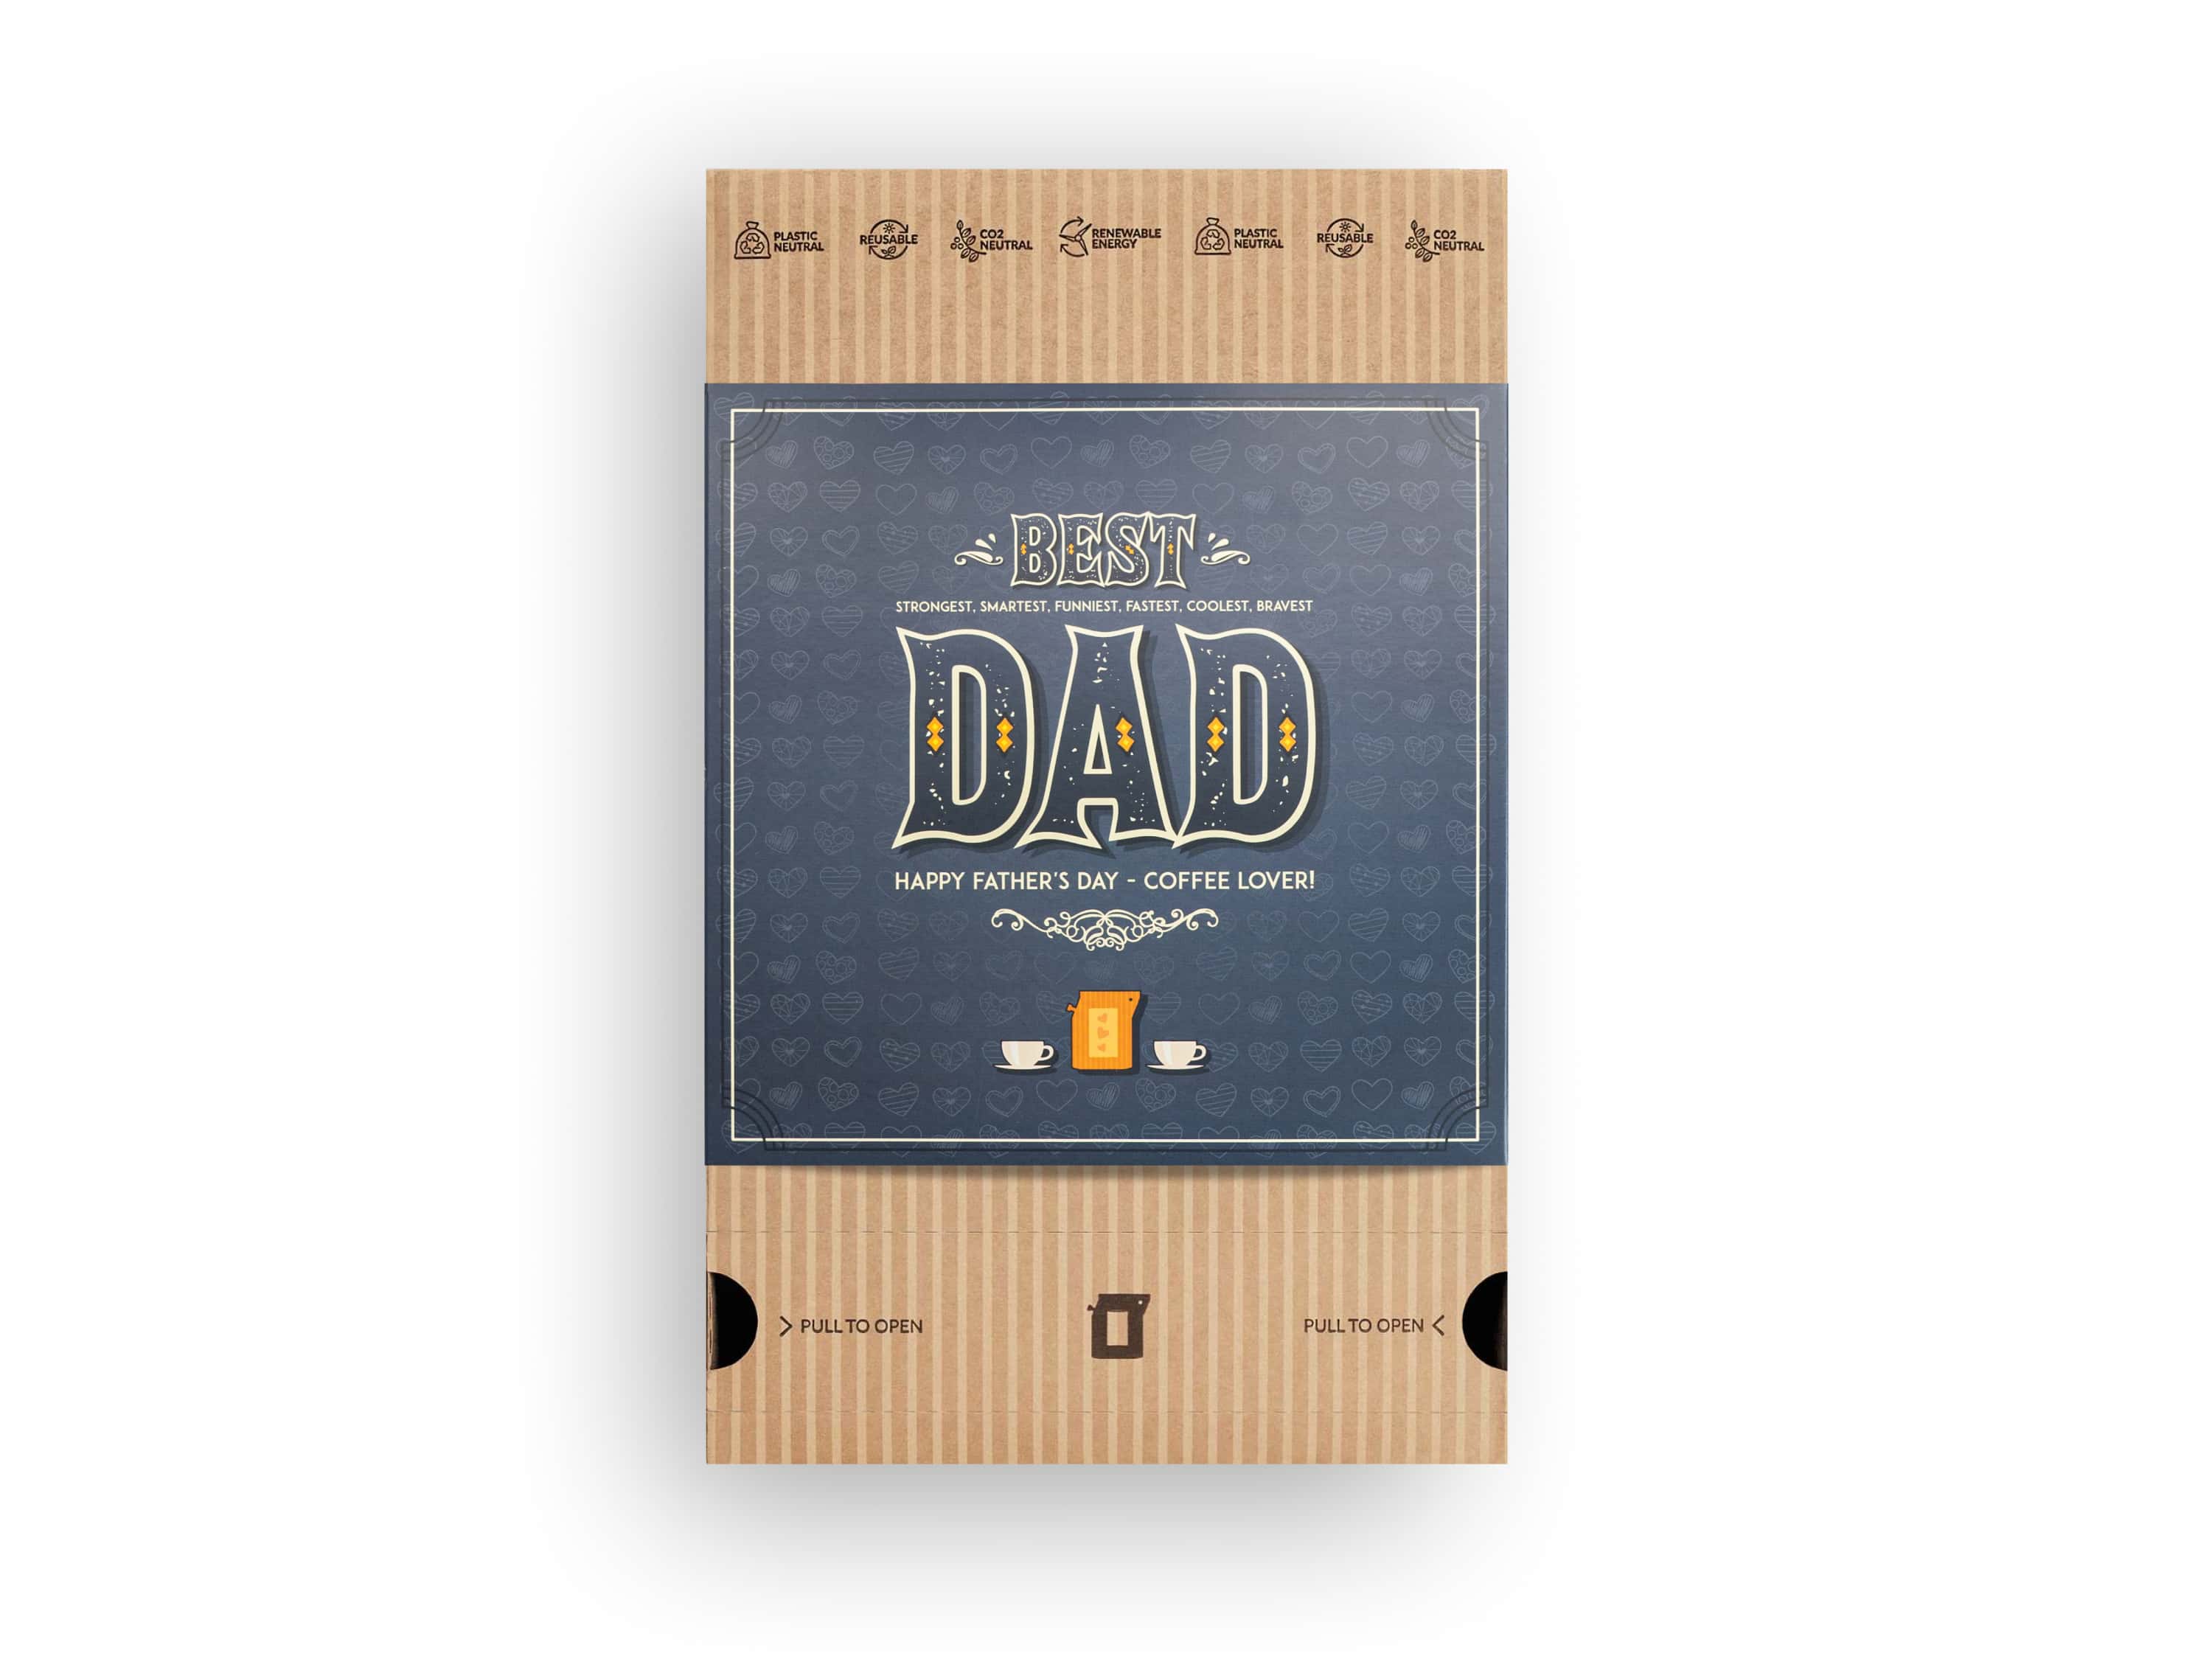 BEST DAD SPECIALTY COFFEE GIFT BOX 25 PCS